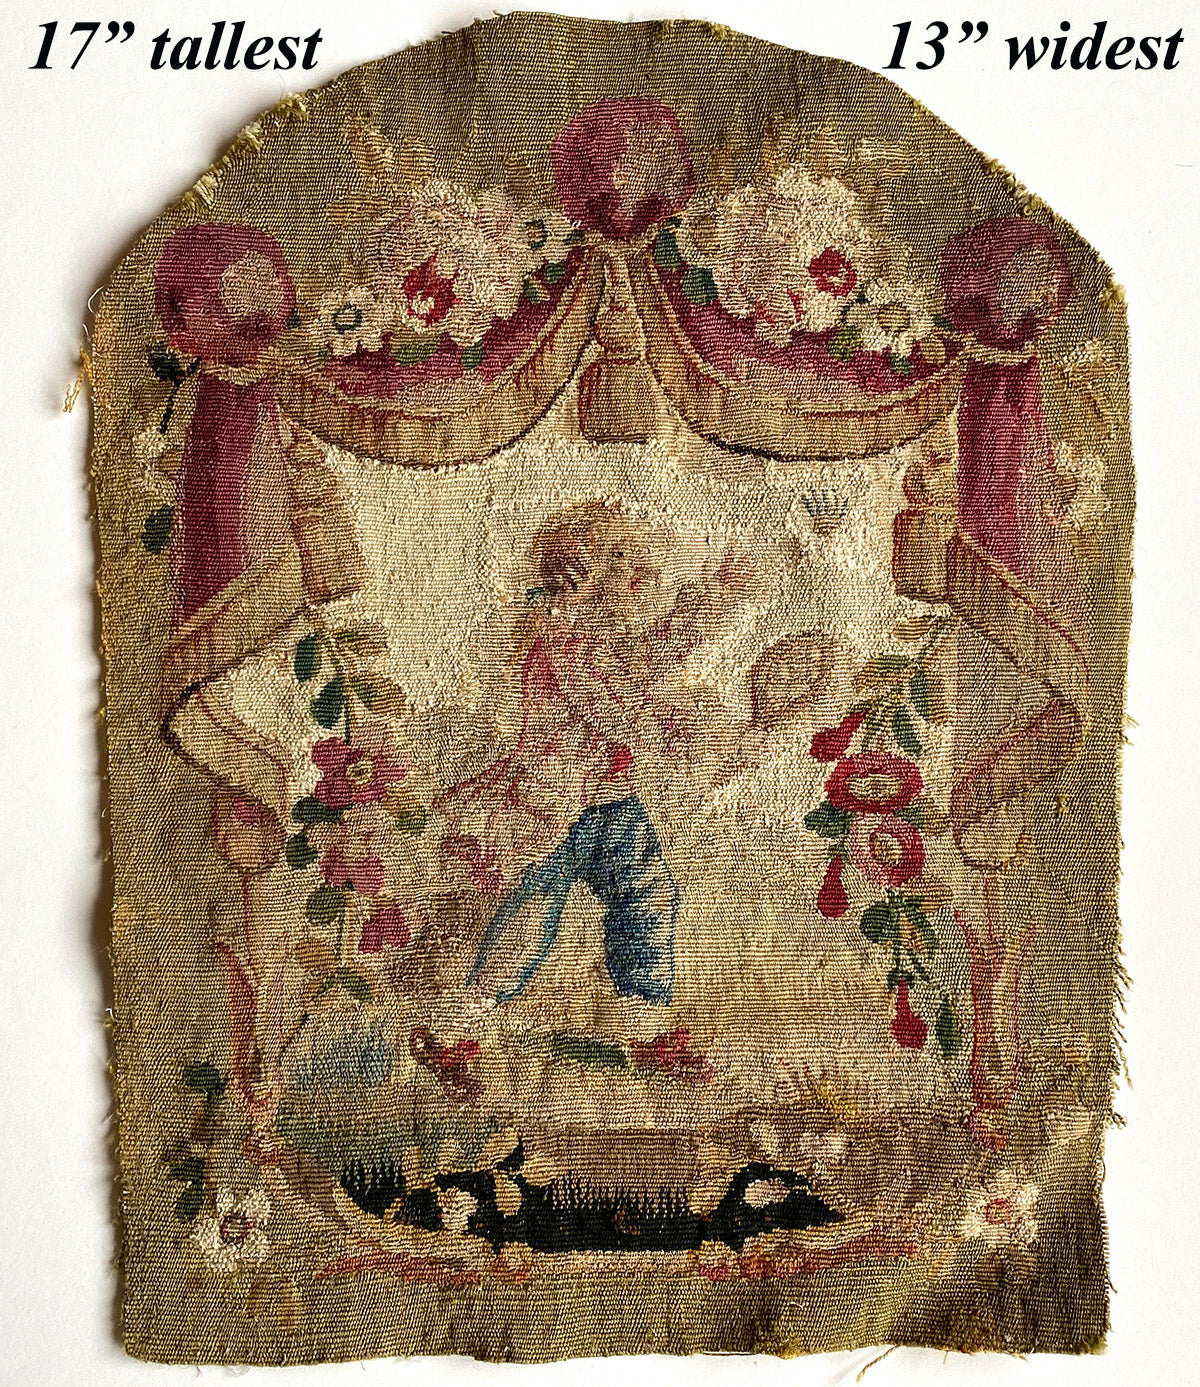 PAIR: Antique Aubusson or Gobelin Wool and Silk Woven Chair Back Panels for Pillow Tops, 1700s.